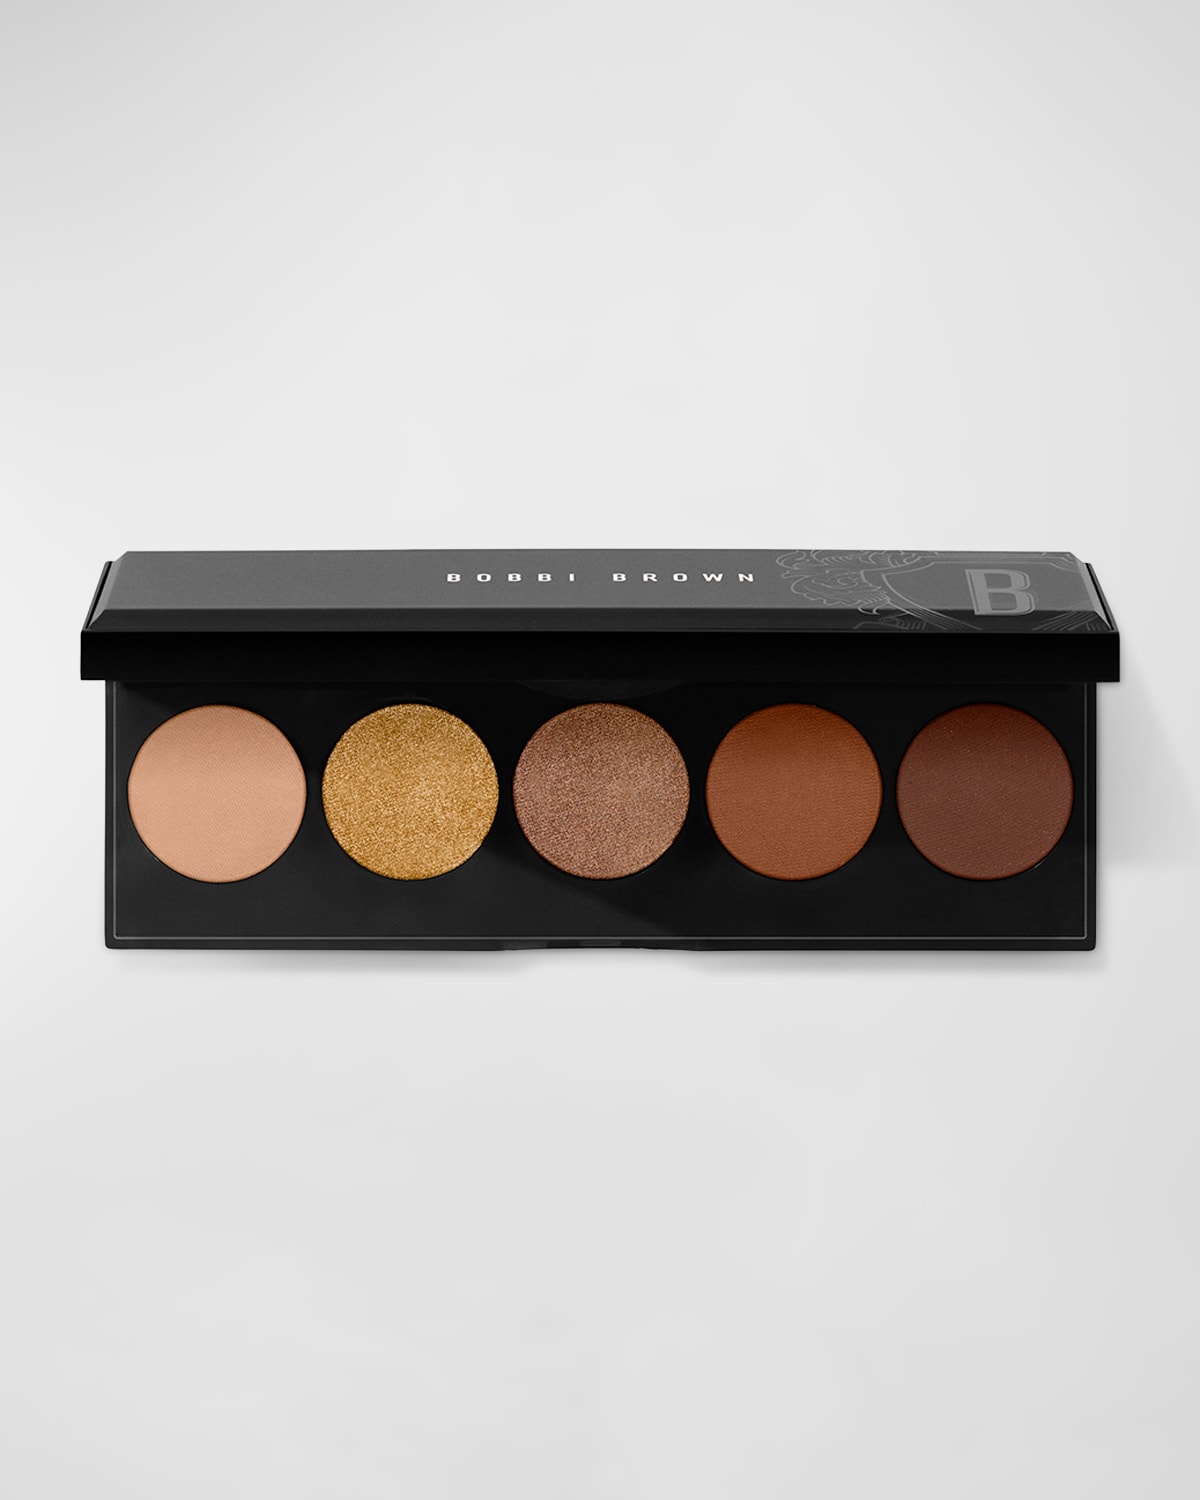 New Nudes Eye Shadow Palette ($95 Value)